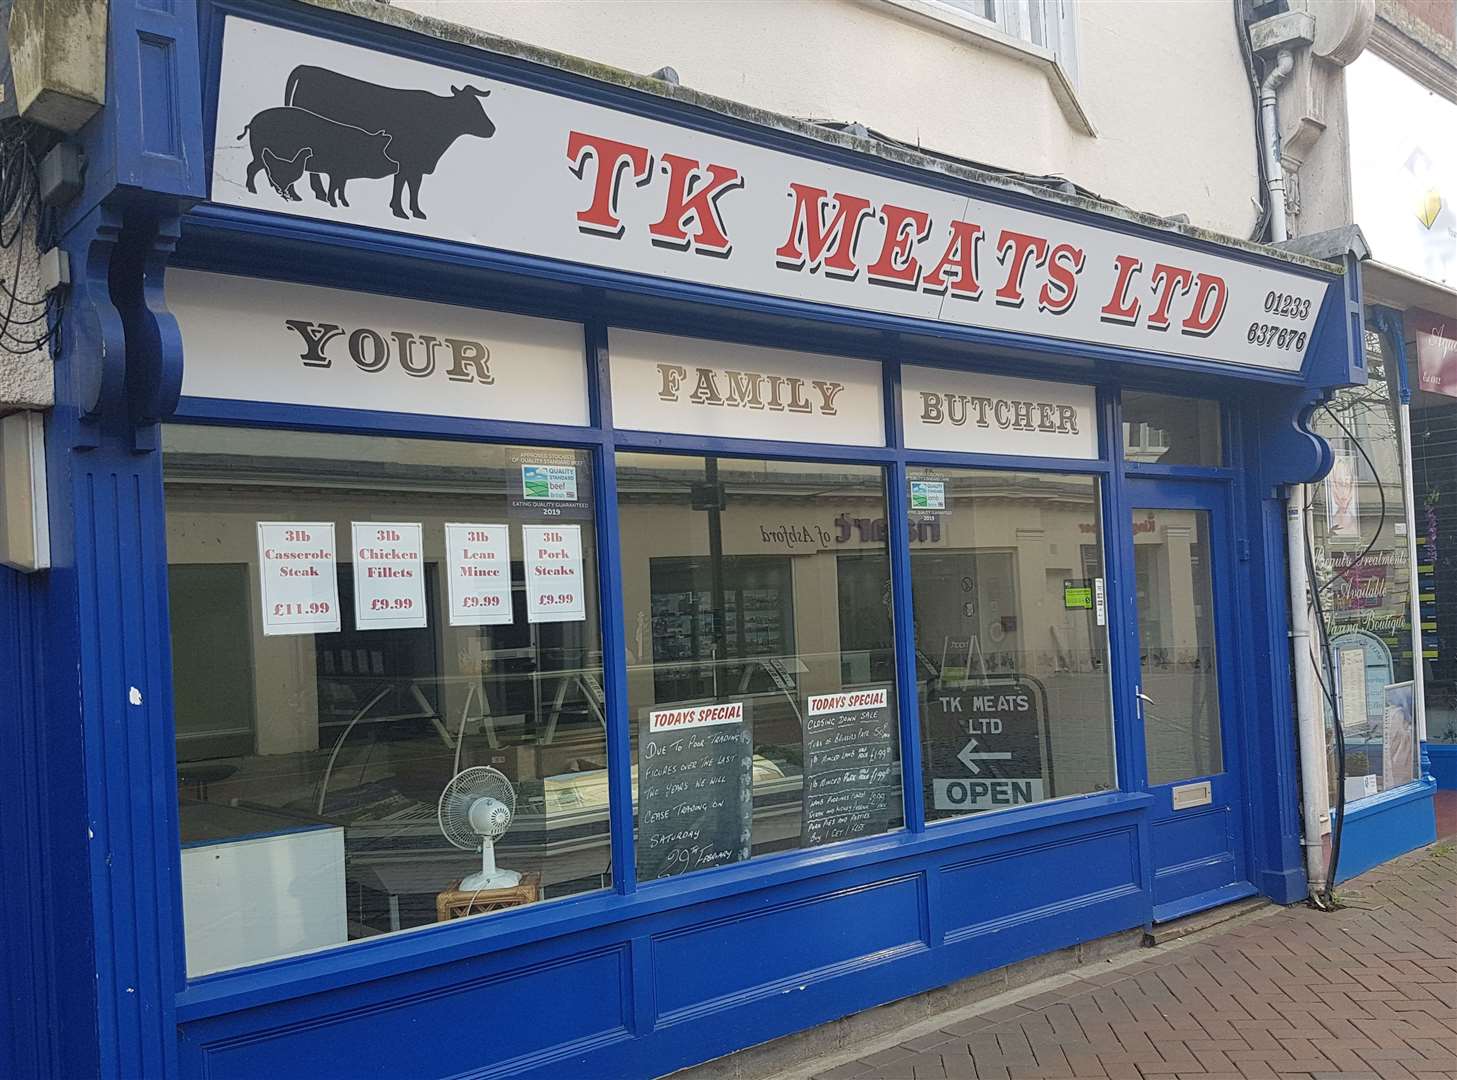 TK Meats in the high street now closes on Saturday